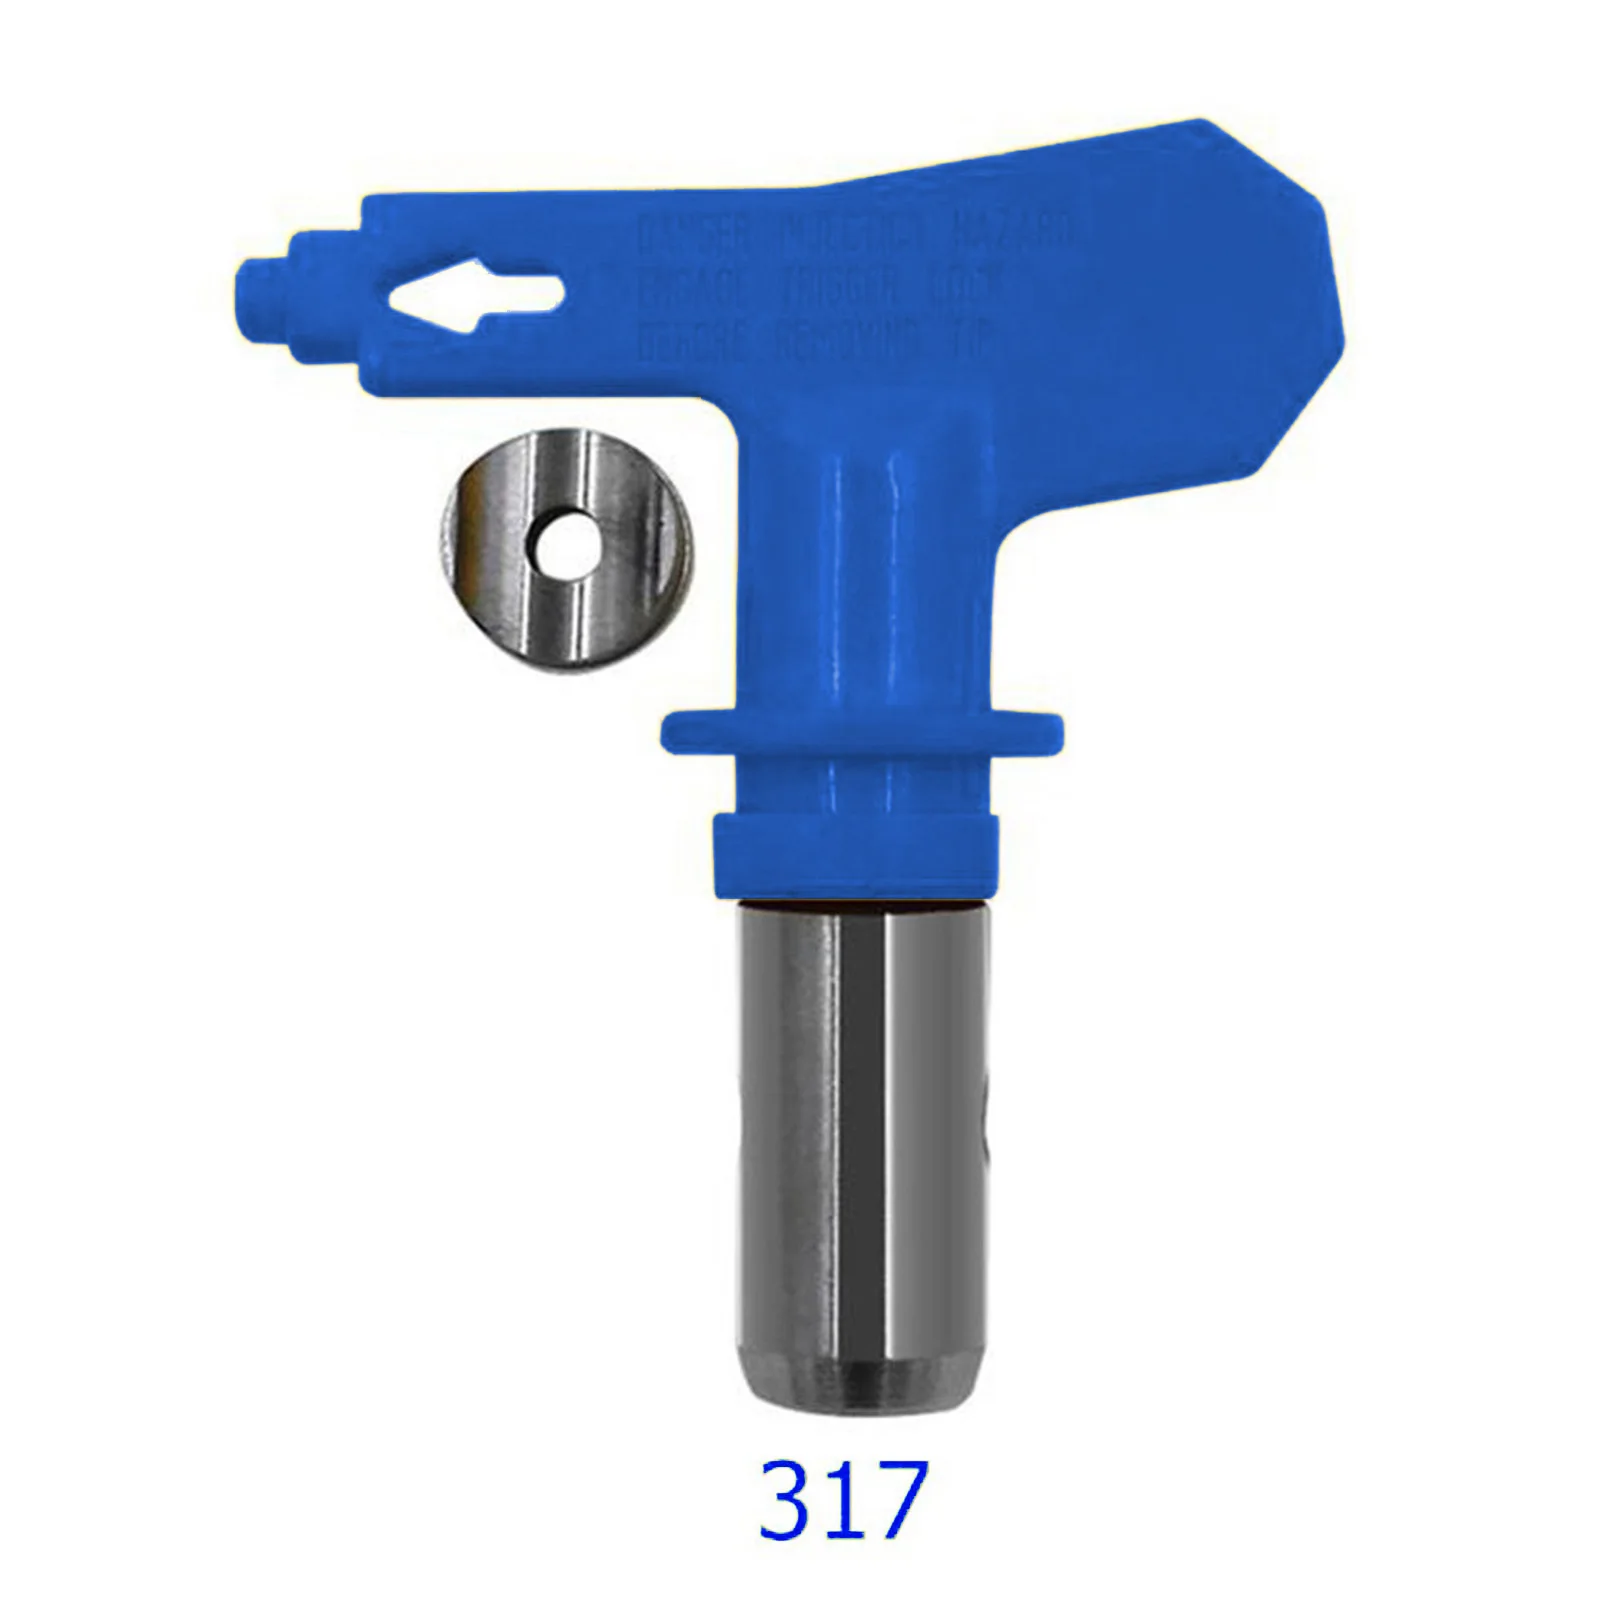 

Universal Airless Spray Tip Nozzle Achieve Consistent and Even Paint Distribution Ideal for Various Painting Projects